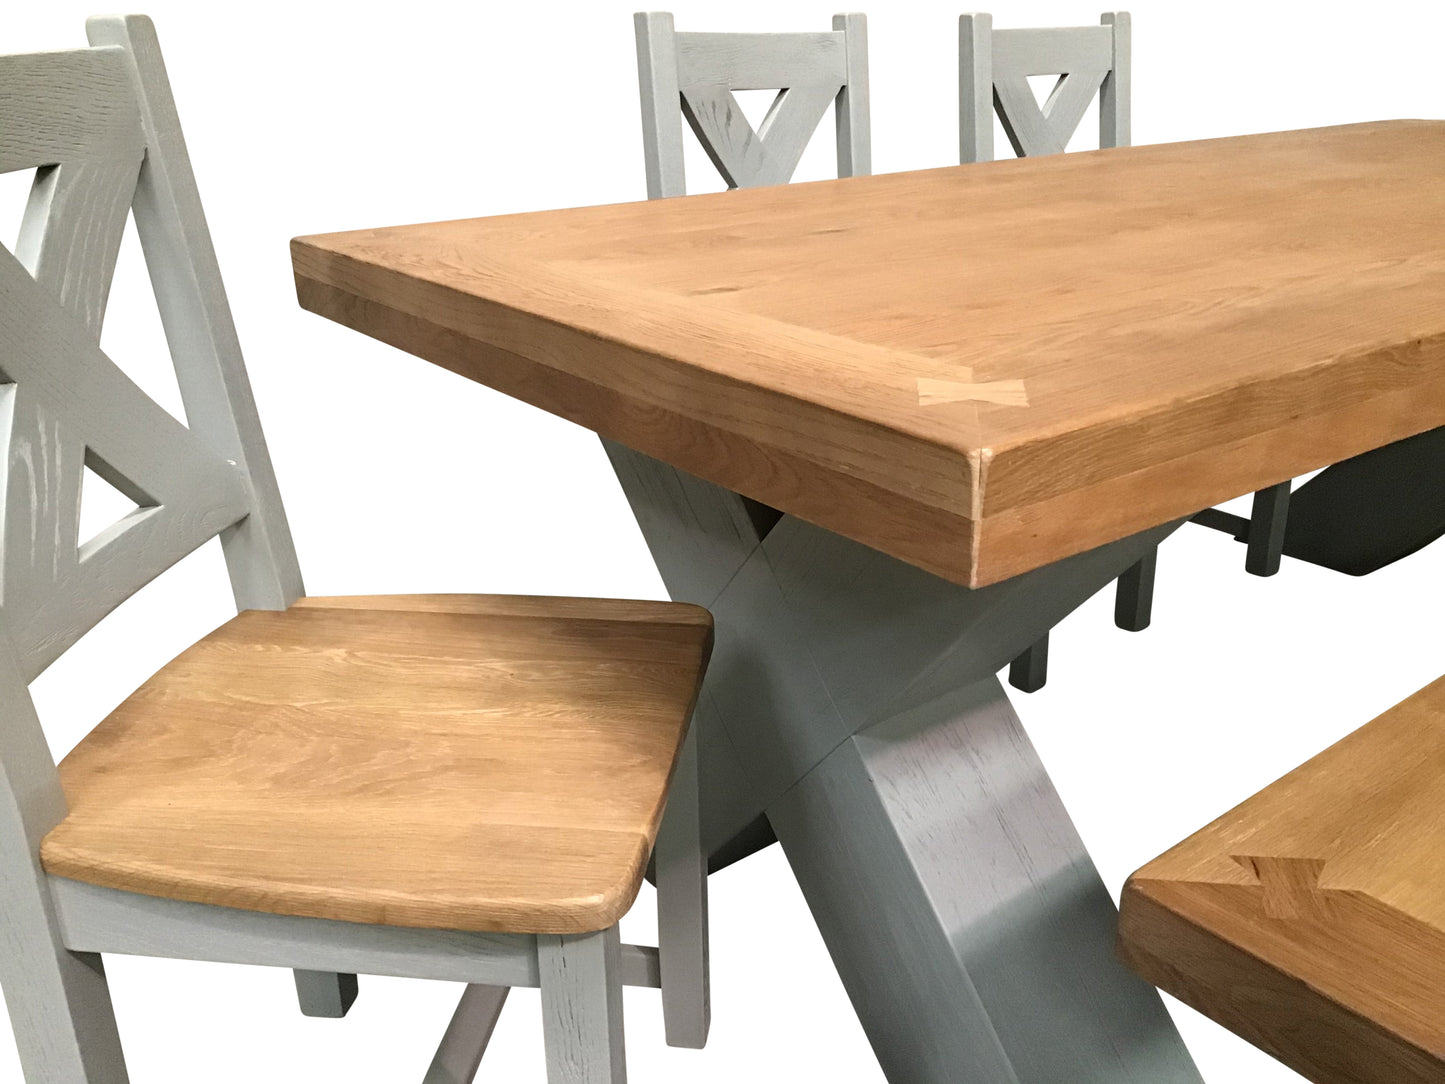 Maximus Oak 1.9m Dining Set painted French Grey with Maximus Dining Chairs